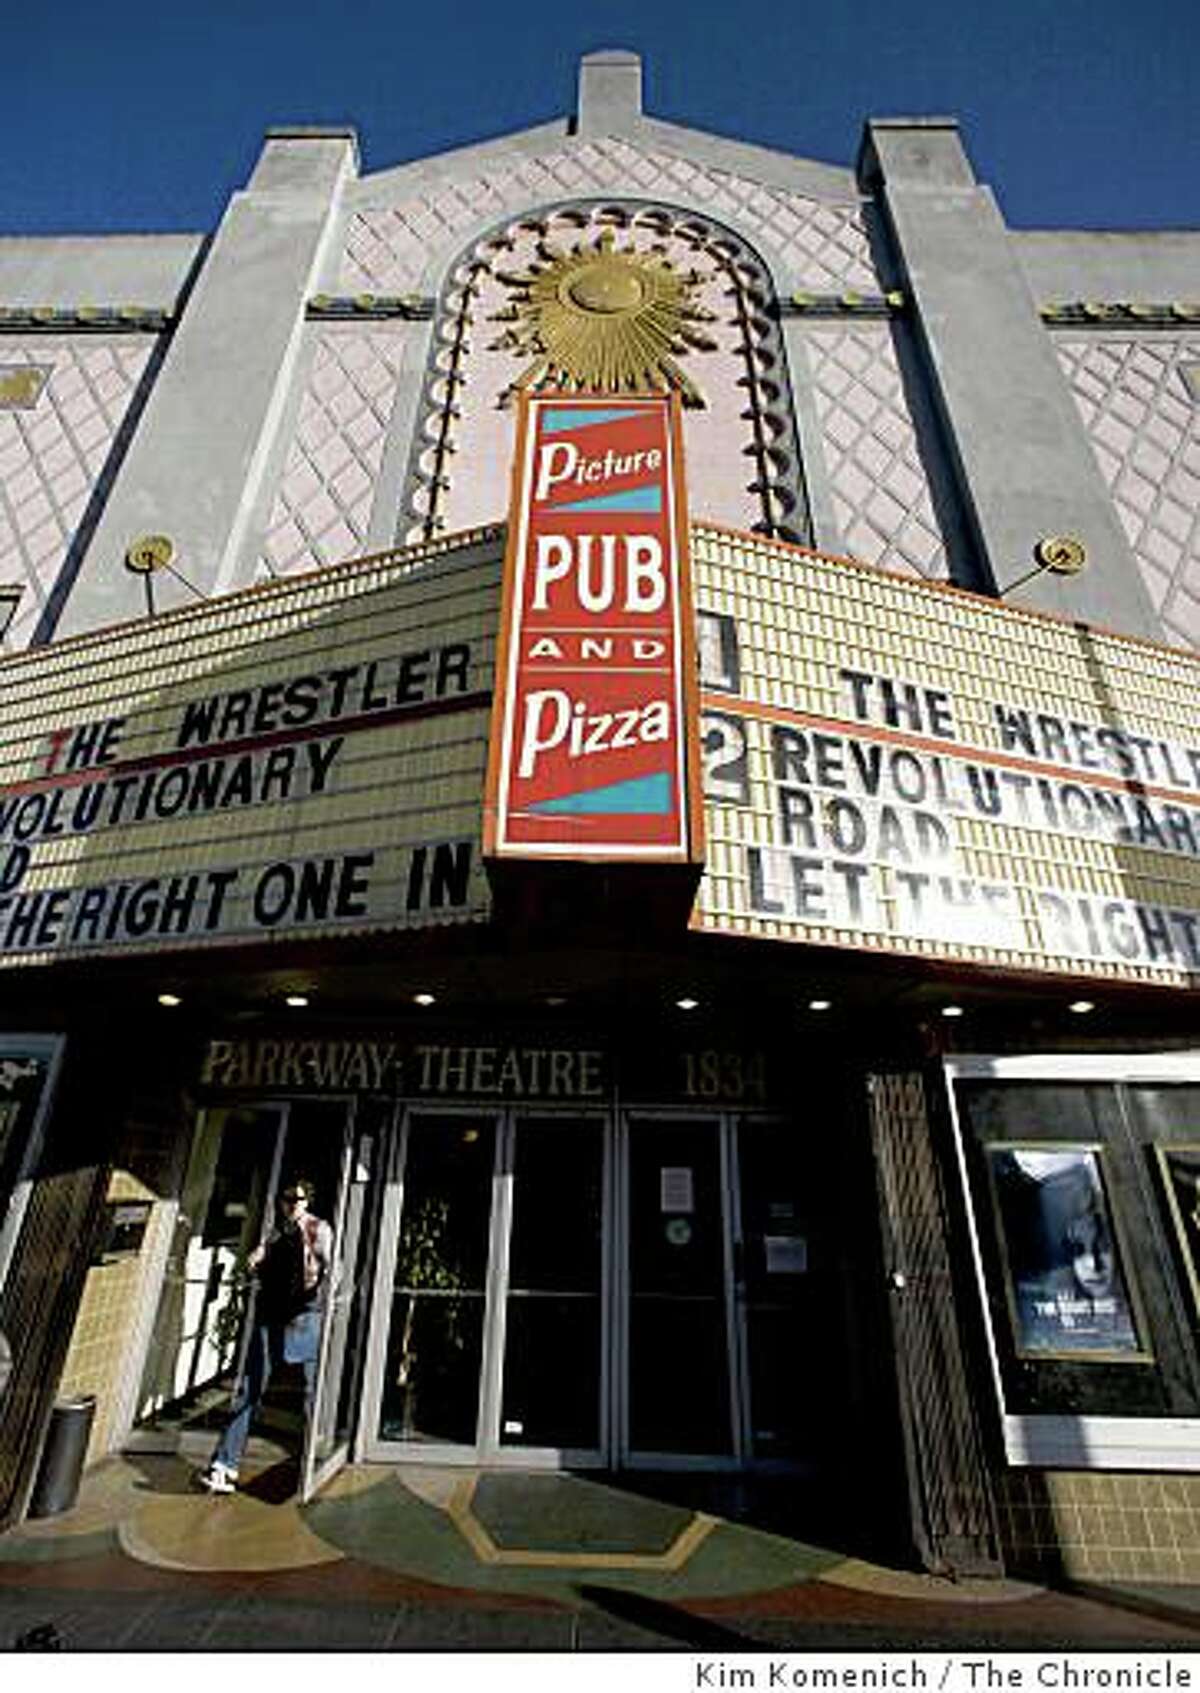 The Parkway Speakeasy Theater in Oakland, Calif., shows "The Wrestler" on Thursday night, Mar. 19, 2009, a few days before it closes its doors.